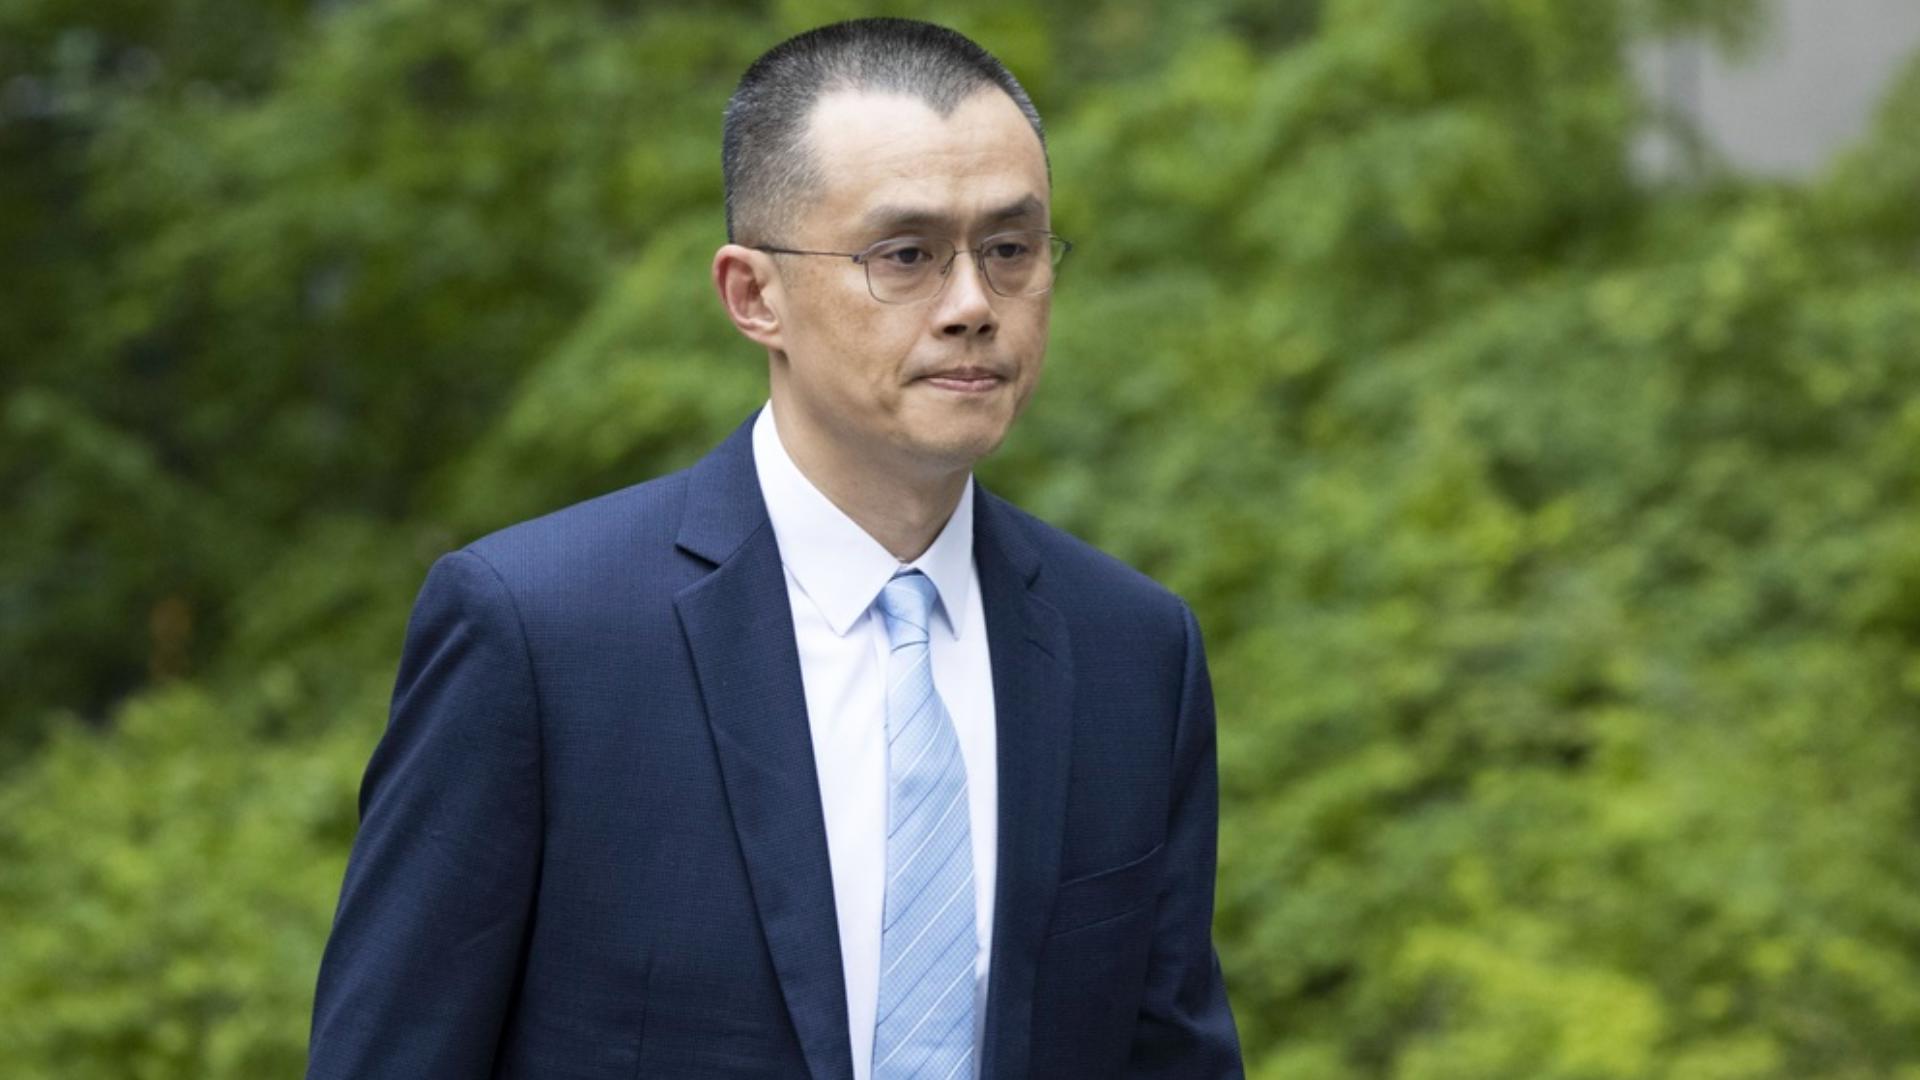 Zhao pleaded guilty and stepped down as Binance CEO in November as the company agreed to pay $4.3 billion to settle money laundering allegations.